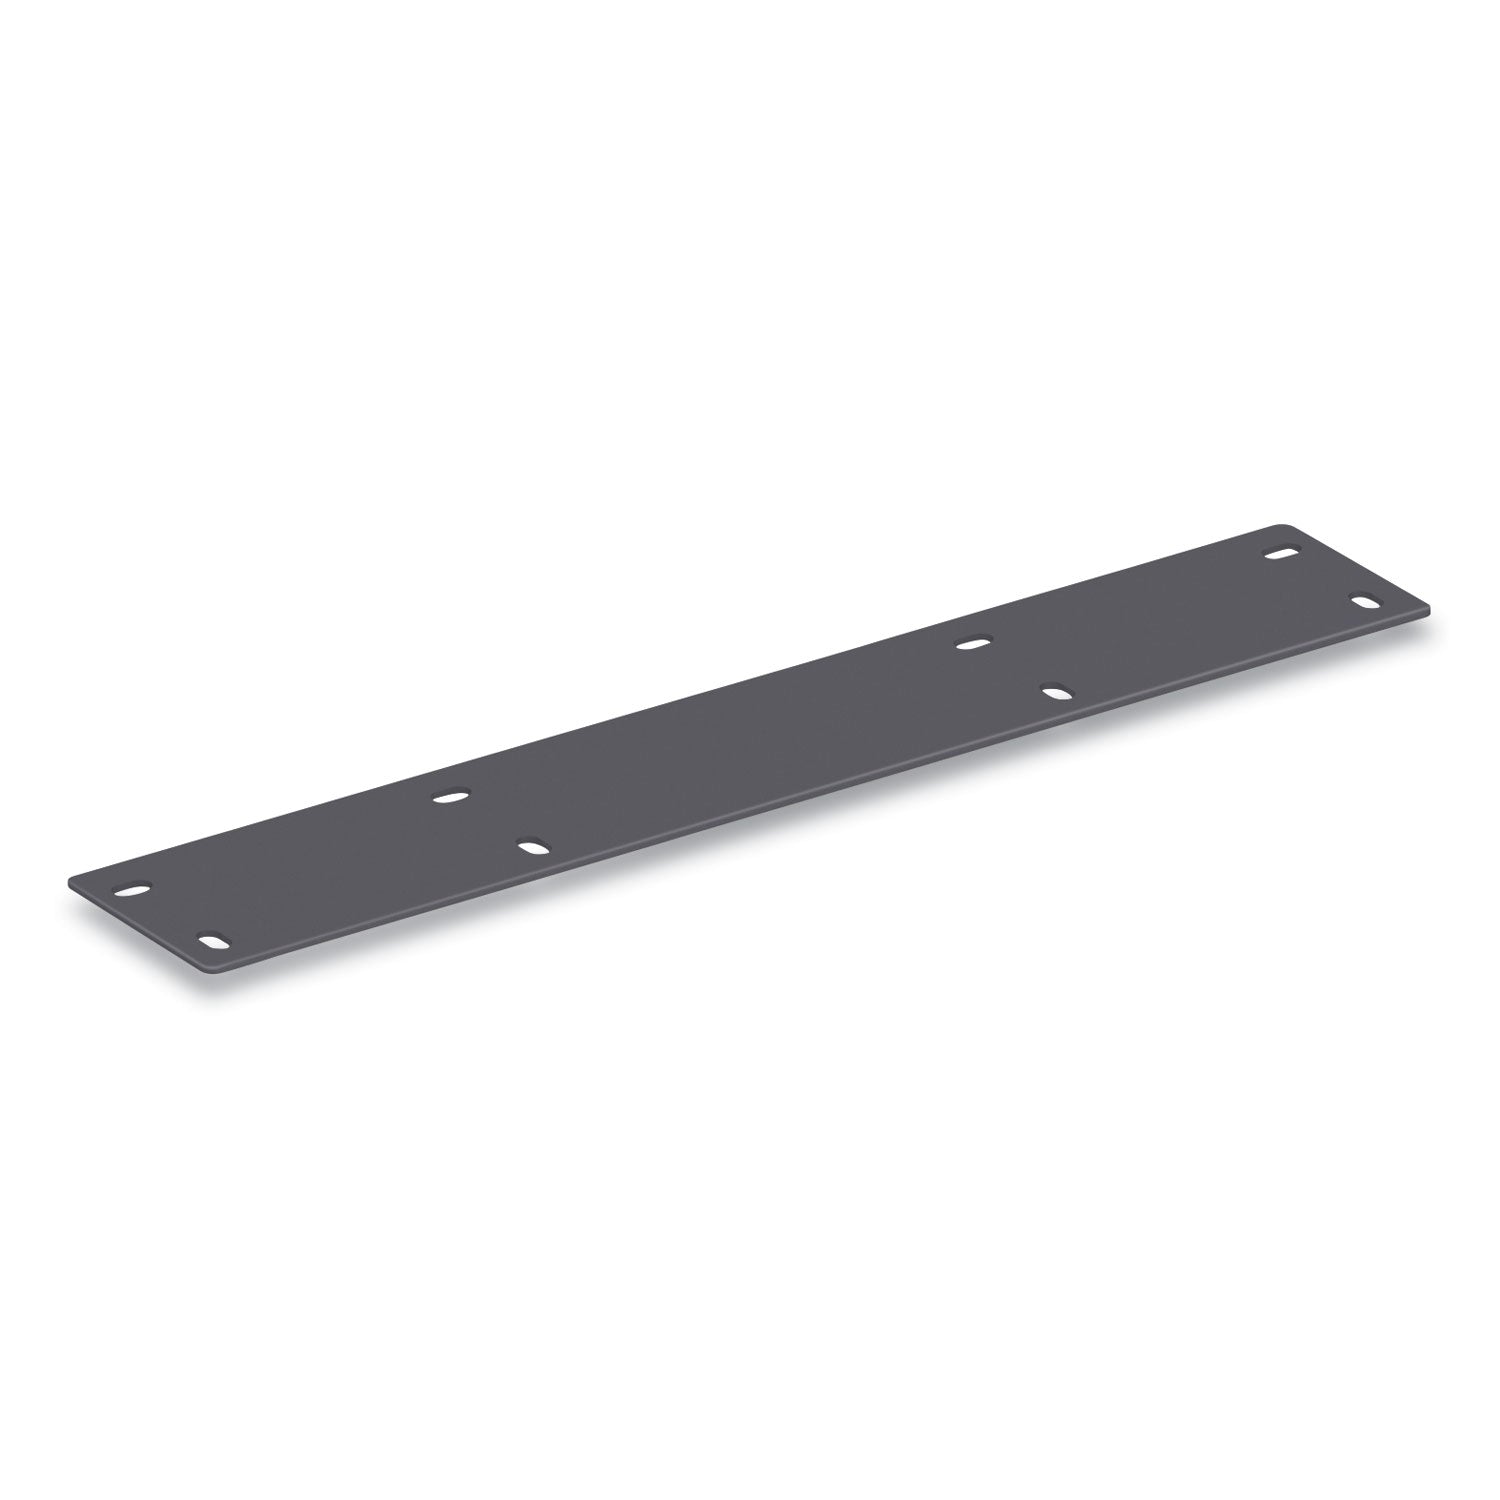 mod-flat-bracket-to-join-24d-worksurfaces-to-30d-worksurfaces-to-create-an-l-station-graphite_honplfb24 - 1